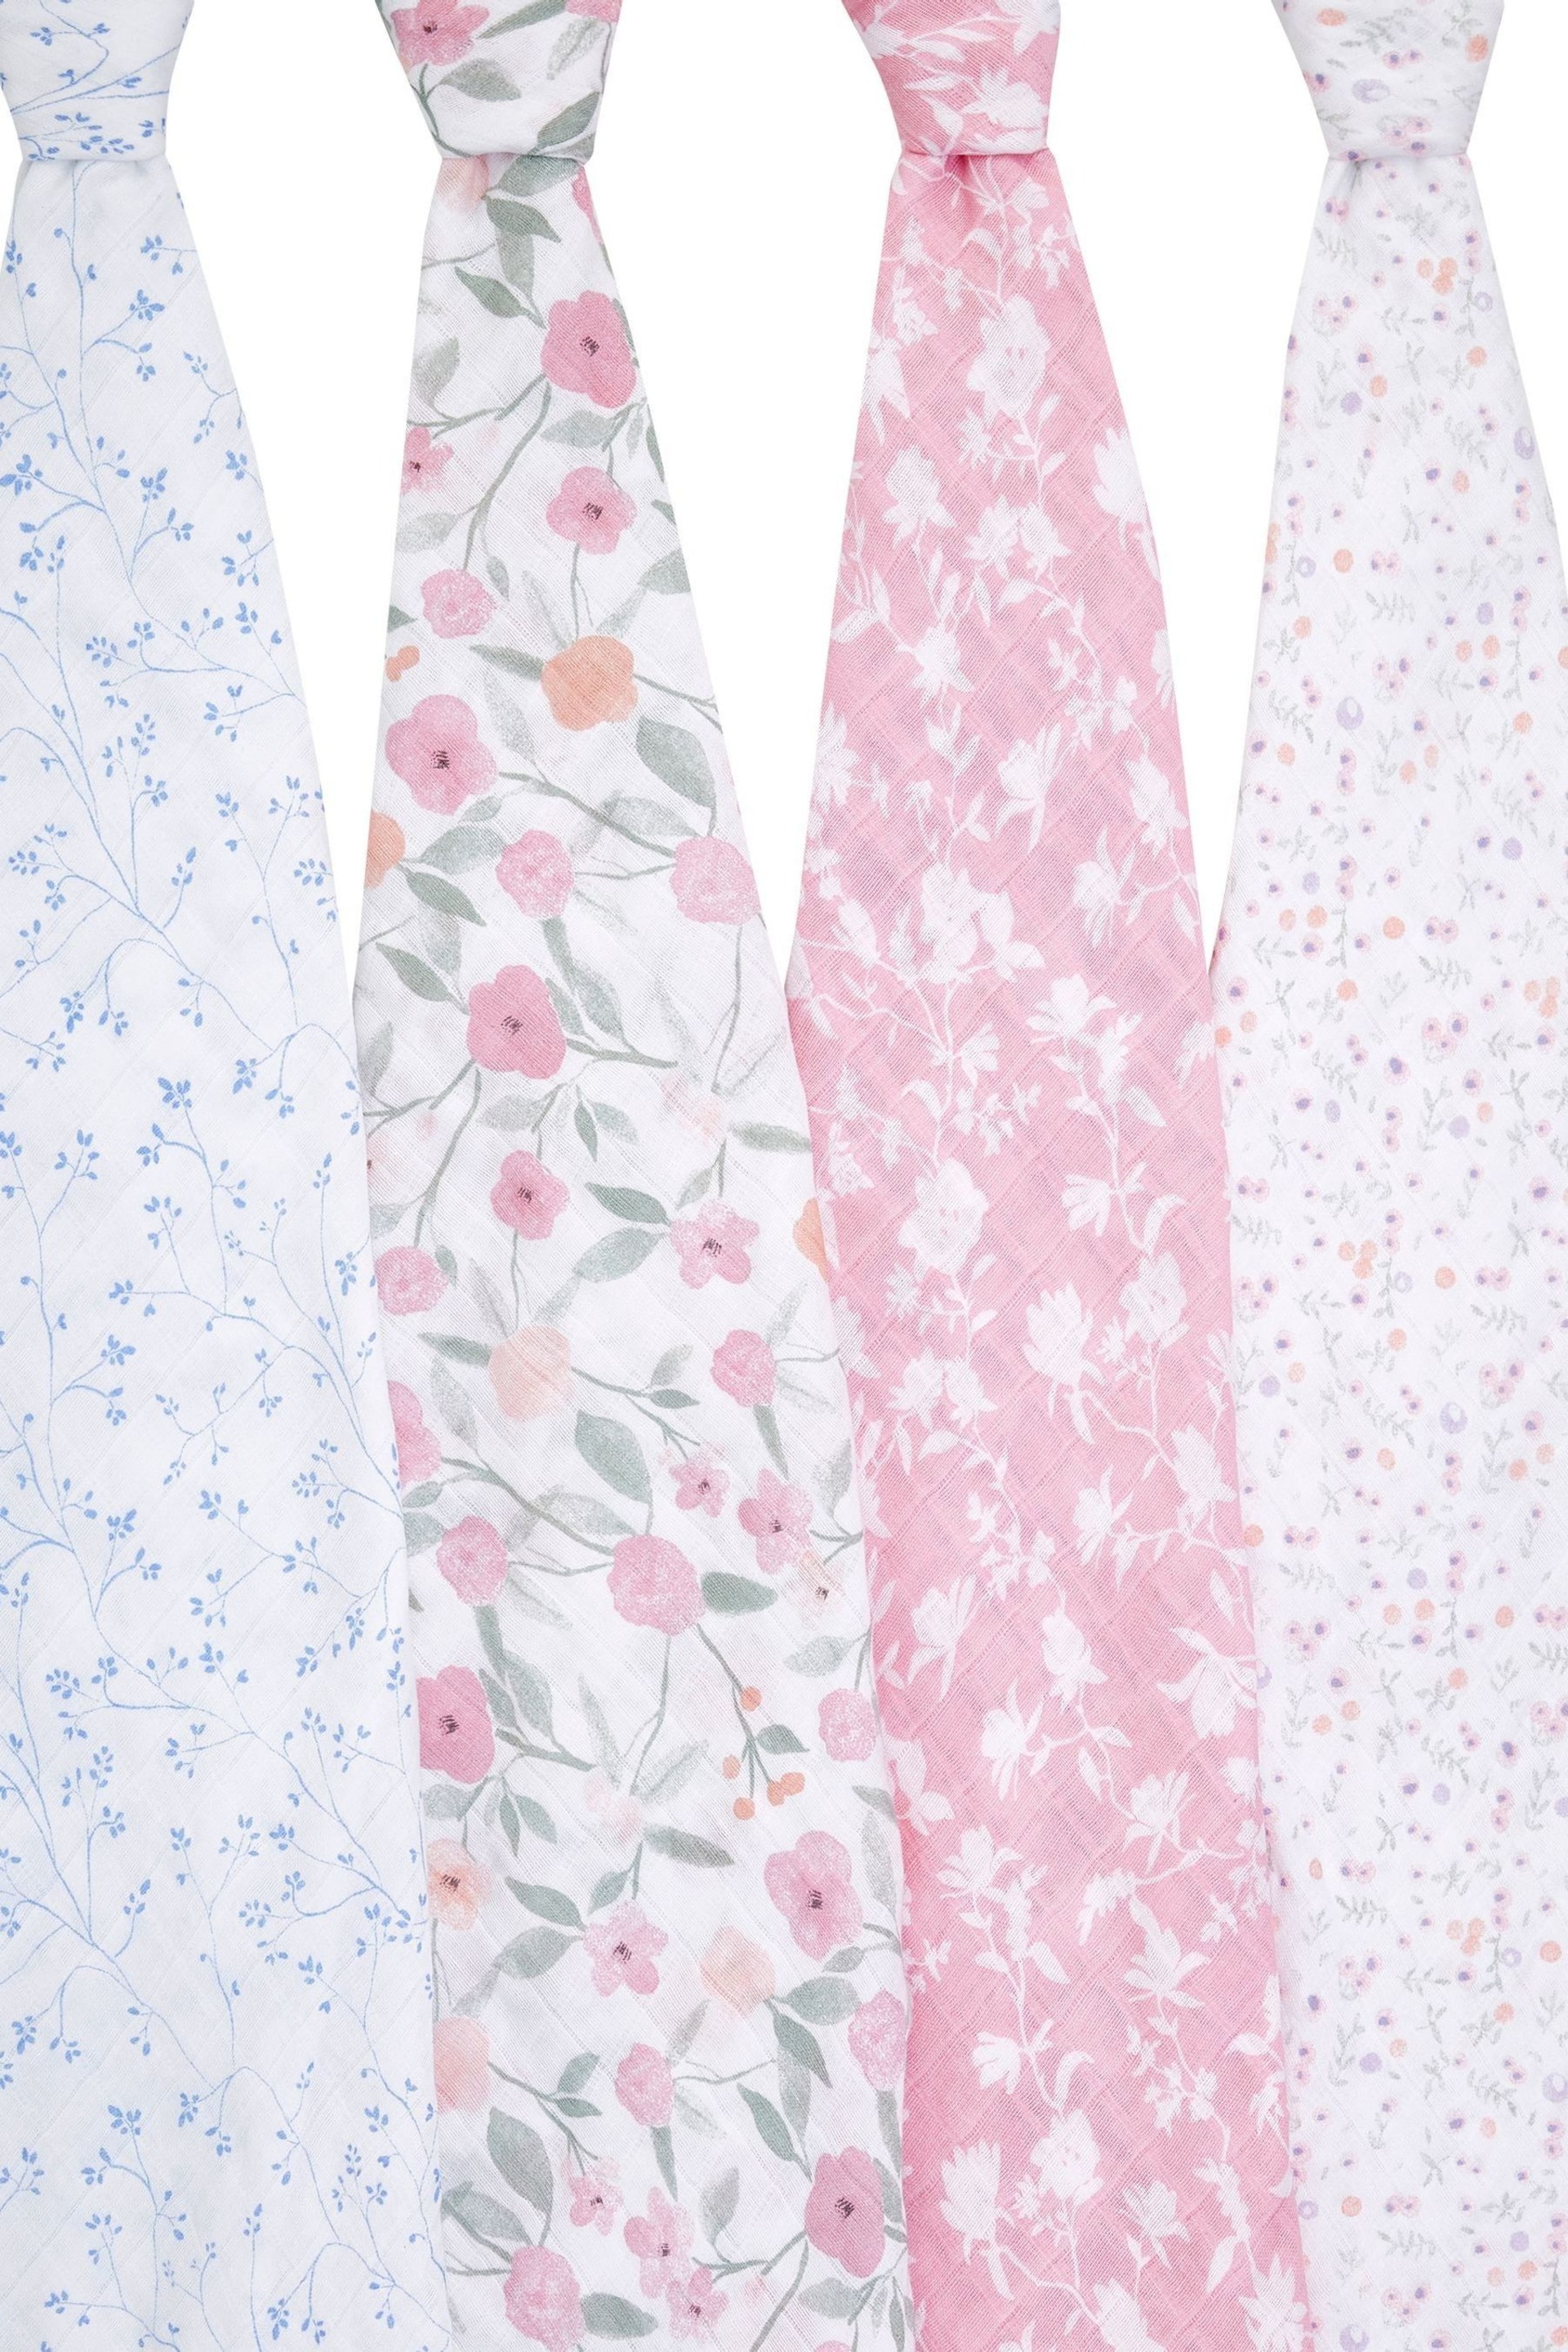 aden + anais ma fleur Large Cotton Muslin Blankets 4 Pack - Image 5 of 5